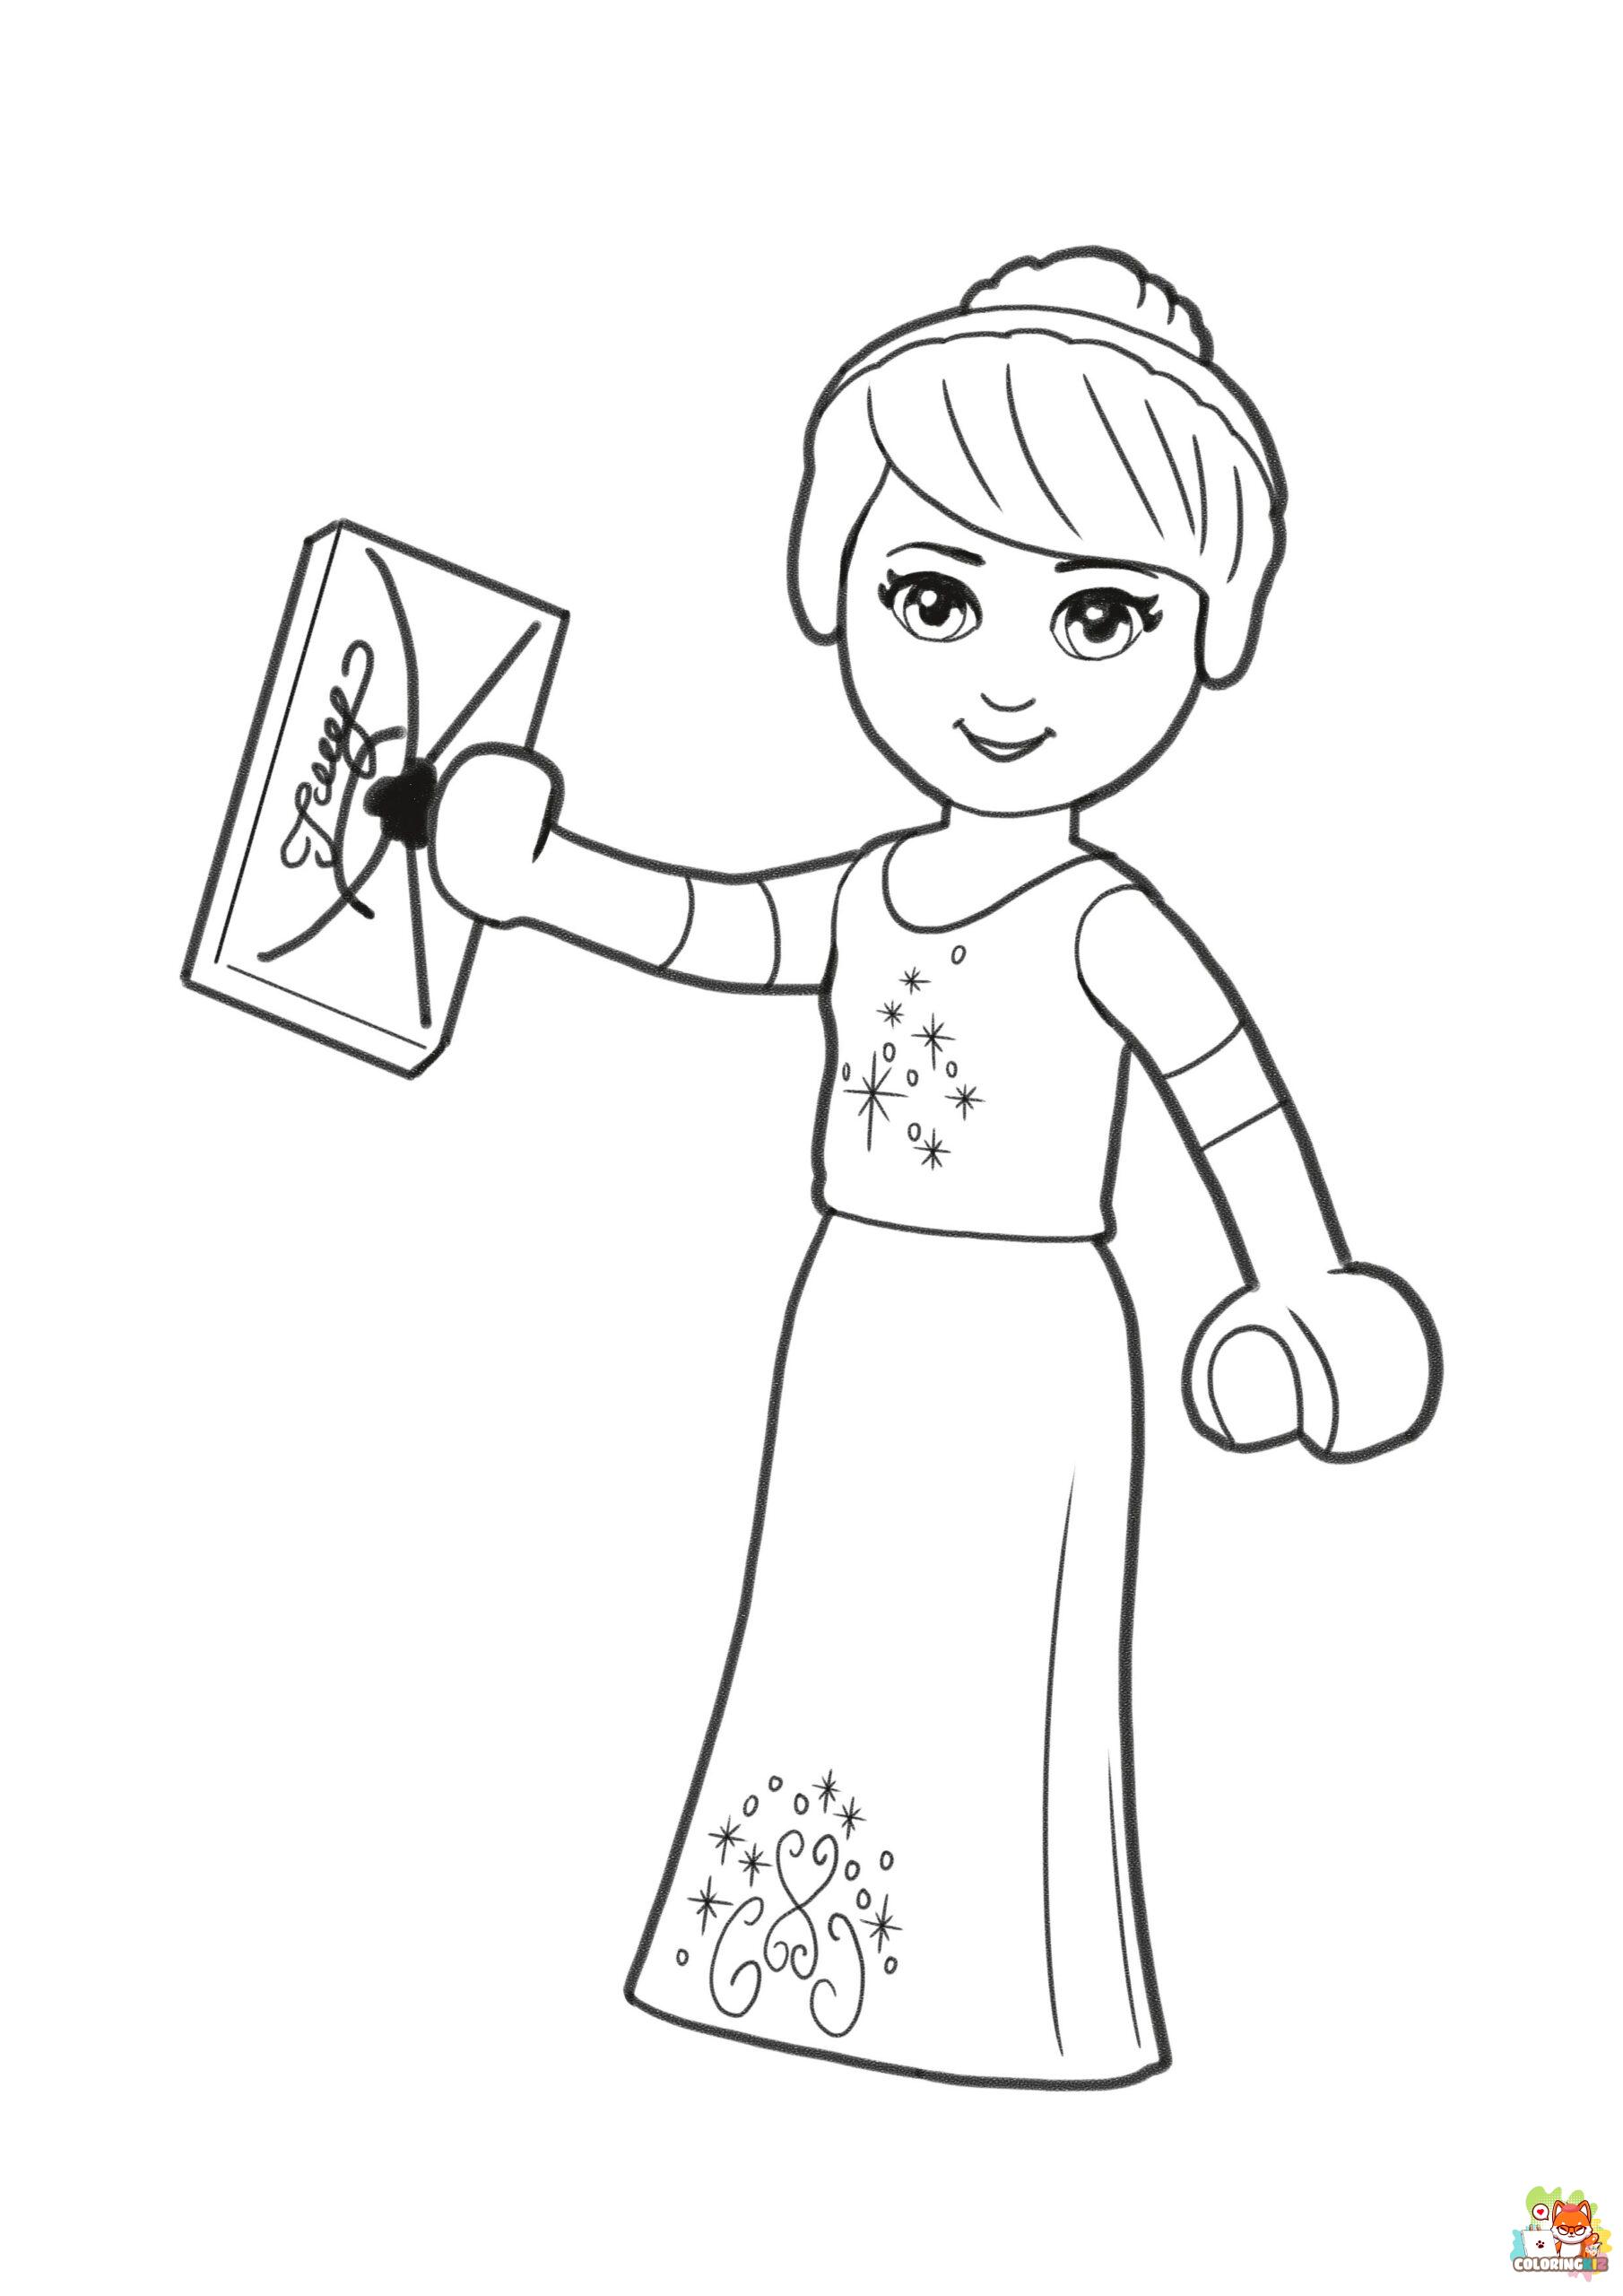 Lego Princess Coloring Pages 9